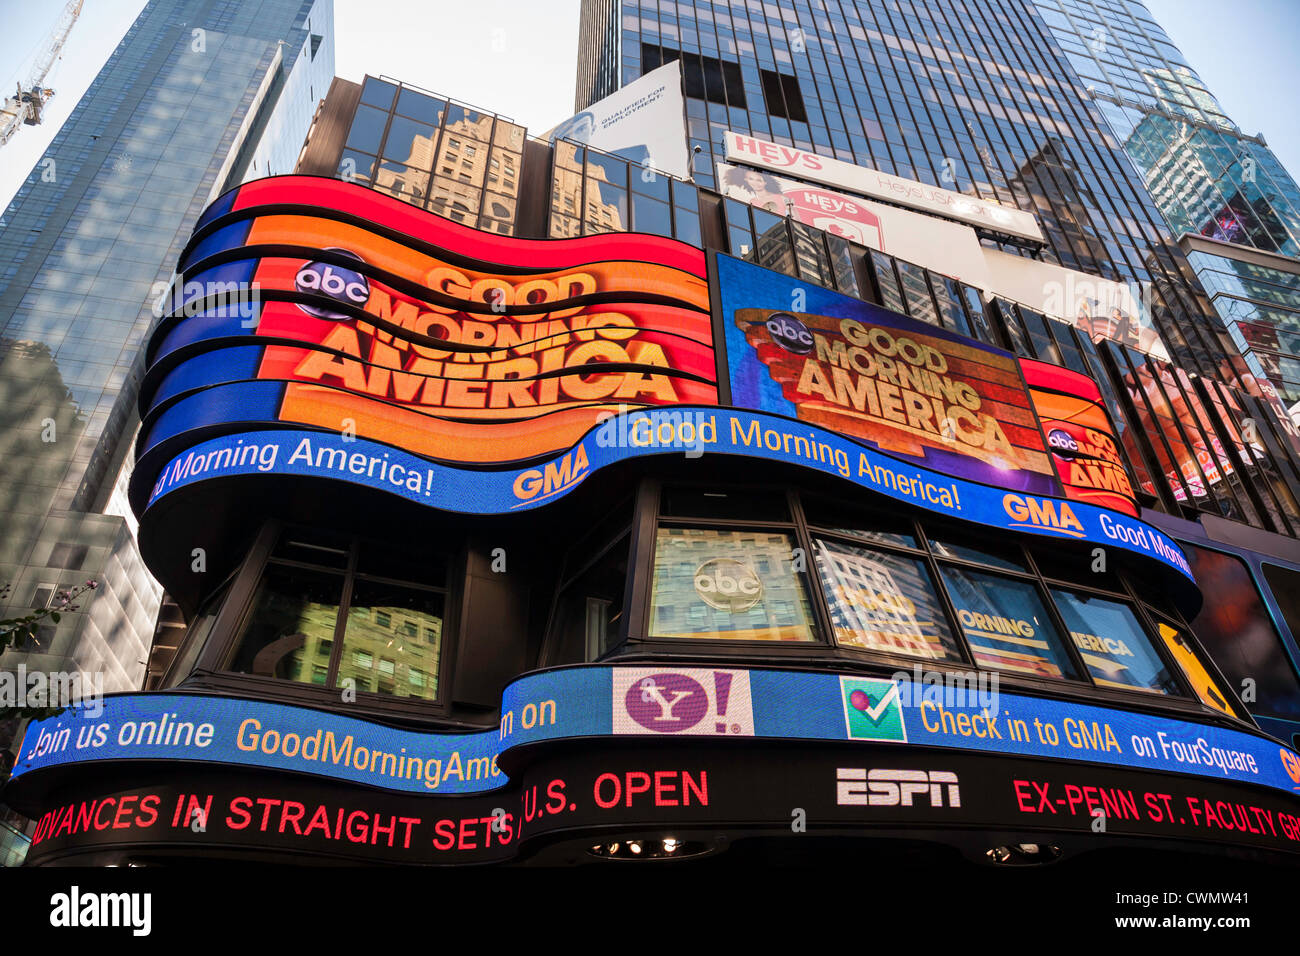 ABC Good Morning America News Show in Times Square, NYC Stock Photo